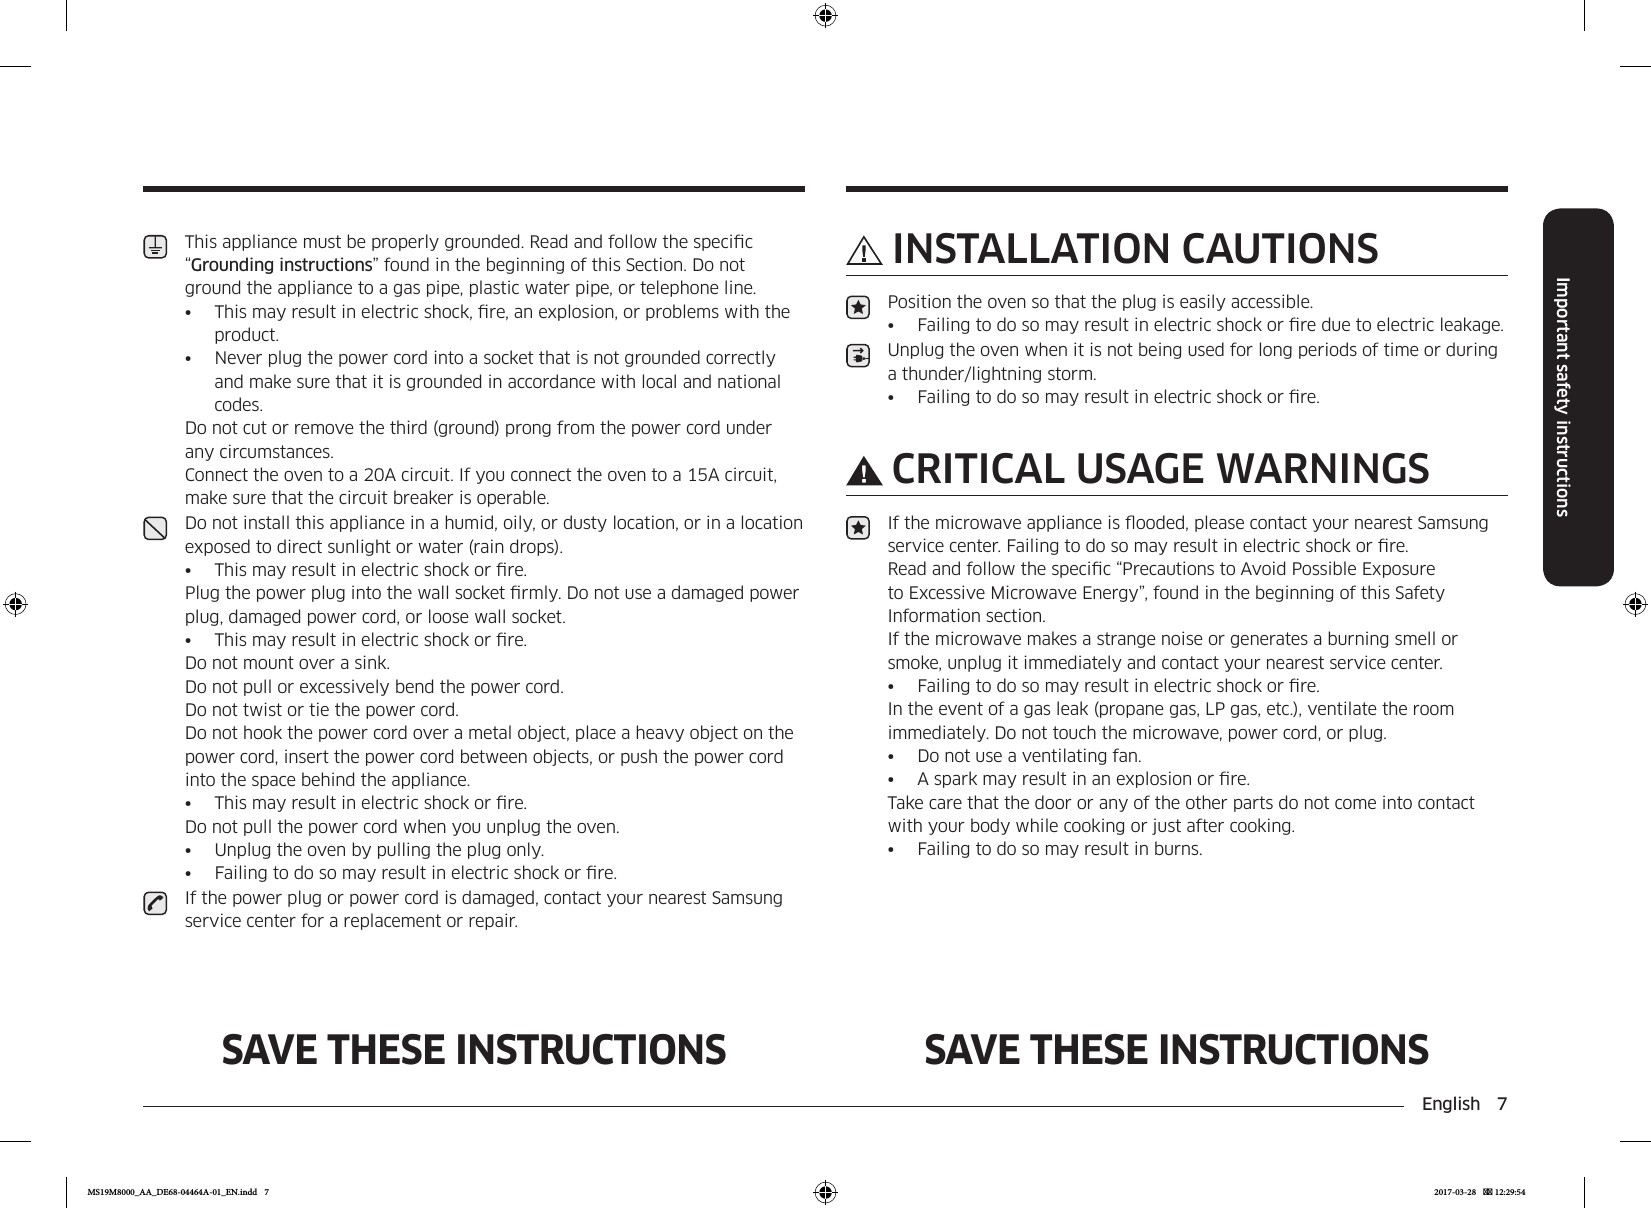 English  7Important safety instructionsSAVE THESE INSTRUCTIONS SAVE THESE INSTRUCTIONSINSTALLATION CAUTIONSPosition the oven so that the plug is easily accessible.•  Failing to do so may result in electric shock or re due to electric leakage.Unplug the oven when it is not being used for long periods of time or during a thunder/lightning storm.•  Failing to do so may result in electric shock or re.CRITICAL USAGE WARNINGSIf the microwave appliance is ooded, please contact your nearest Samsung service center. Failing to do so may result in electric shock or re.Read and follow the specic “Precautions to Avoid Possible Exposure to Excessive Microwave Energy”, found in the beginning of this Safety Information section.If the microwave makes a strange noise or generates a burning smell or smoke, unplug it immediately and contact your nearest service center.•  Failing to do so may result in electric shock or re.In the event of a gas leak (propane gas, LP gas, etc.), ventilate the room immediately. Do not touch the microwave, power cord, or plug.•  Do not use a ventilating fan.•  A spark may result in an explosion or re.Take care that the door or any of the other parts do not come into contact with your body while cooking or just after cooking.•  Failing to do so may result in burns.This appliance must be properly grounded. Read and follow the specic “Grounding instructions” found in the beginning of this Section. Do not ground the appliance to a gas pipe, plastic water pipe, or telephone line.•  This may result in electric shock, re, an explosion, or problems with the product.•  Never plug the power cord into a socket that is not grounded correctly and make sure that it is grounded in accordance with local and national codes.Do not cut or remove the third (ground) prong from the power cord under any circumstances. Connect the oven to a 20A circuit. If you connect the oven to a 15A circuit, make sure that the circuit breaker is operable.Do not install this appliance in a humid, oily, or dusty location, or in a location exposed to direct sunlight or water (rain drops).•  This may result in electric shock or re.Plug the power plug into the wall socket rmly. Do not use a damaged power plug, damaged power cord, or loose wall socket.•  This may result in electric shock or re.Do not mount over a sink.  Do not pull or excessively bend the power cord.  Do not twist or tie the power cord.Do not hook the power cord over a metal object, place a heavy object on the power cord, insert the power cord between objects, or push the power cord into the space behind the appliance.•  This may result in electric shock or re. Do not pull the power cord when you unplug the oven.•  Unplug the oven by pulling the plug only.•  Failing to do so may result in electric shock or re.If the power plug or power cord is damaged, contact your nearest Samsung service center for a replacement or repair.MS19M8000_AA_DE68-04464A-01_EN.indd   7 2017-03-28    12:29:54